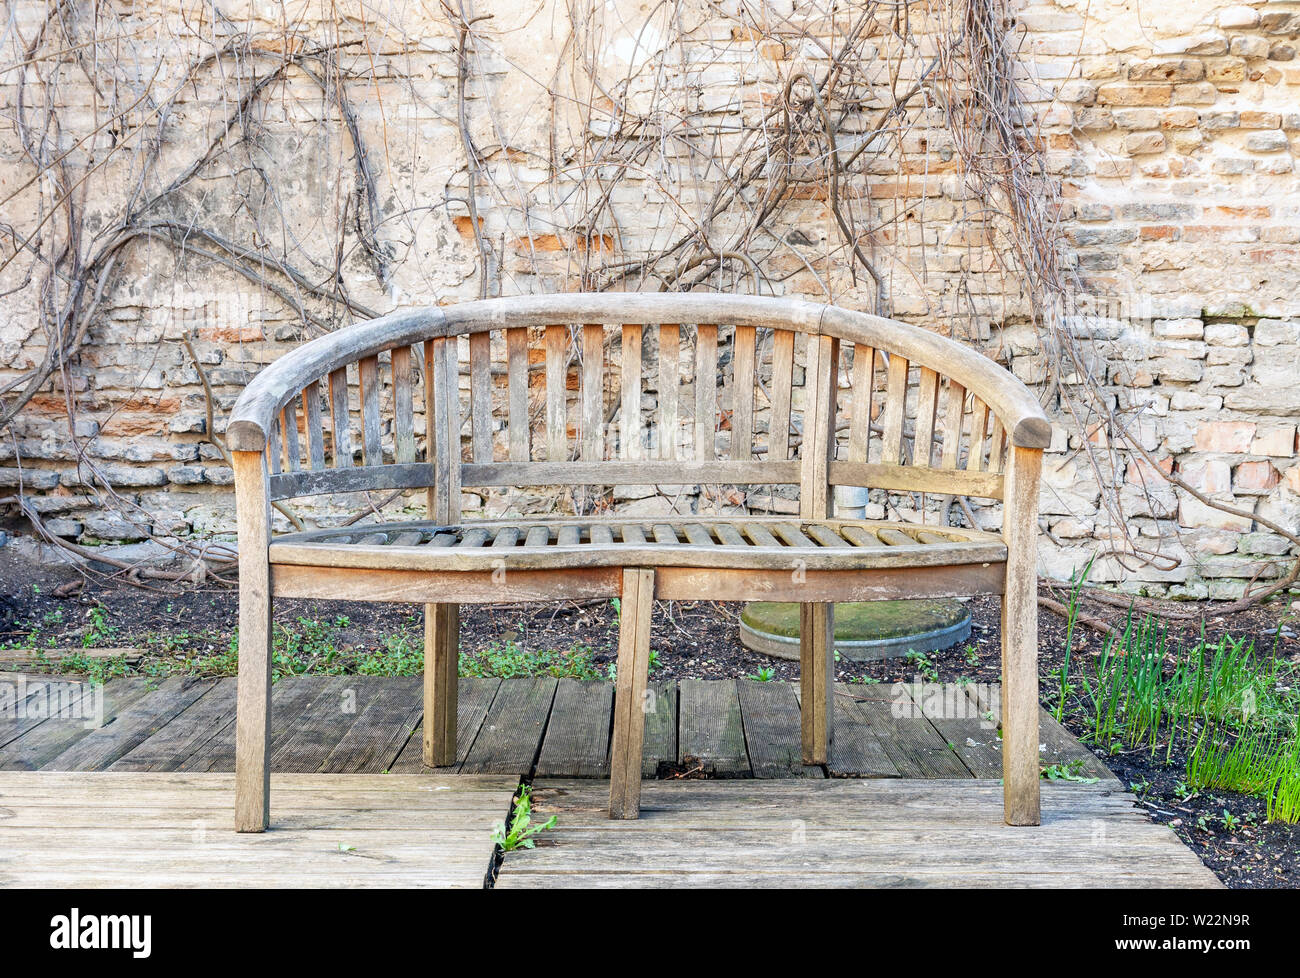 Old abandoned outdoor bench in a background of weathered brick wall and dry creeper plant, front view picture, no people Stock Photo